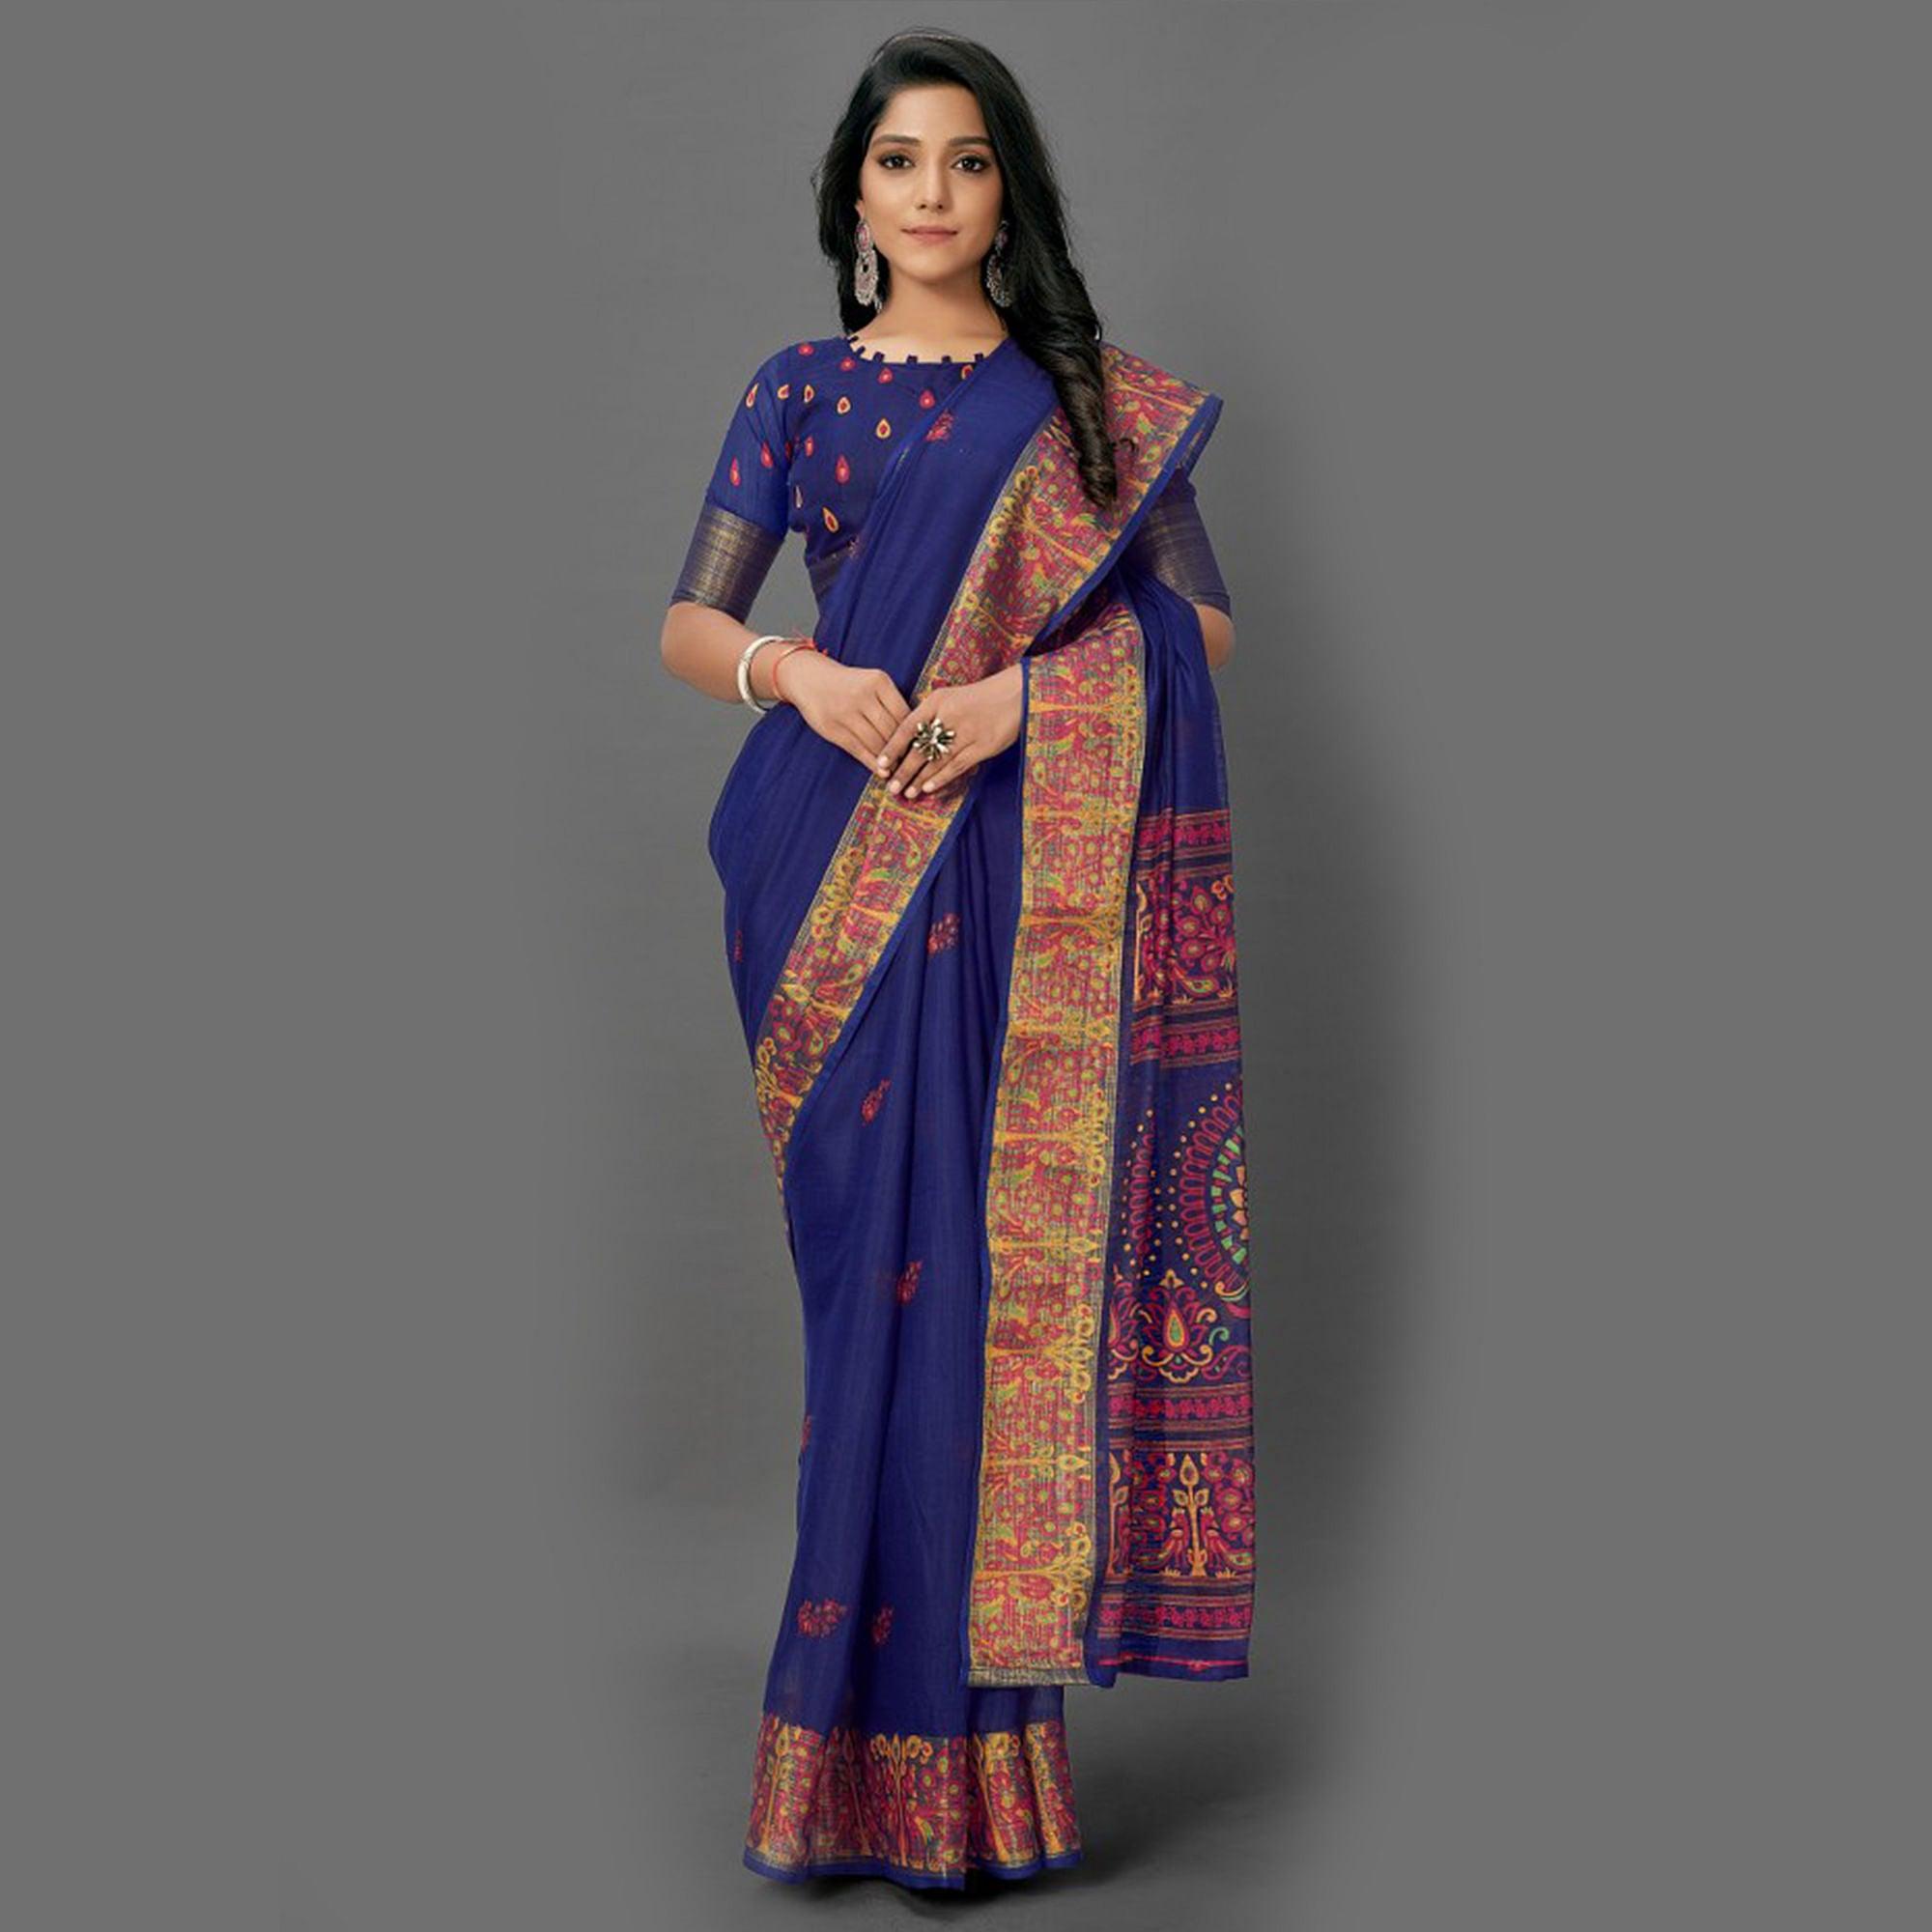 Flattering Navy Blue Colored Casual Wear Printed Cotton Saree - Peachmode